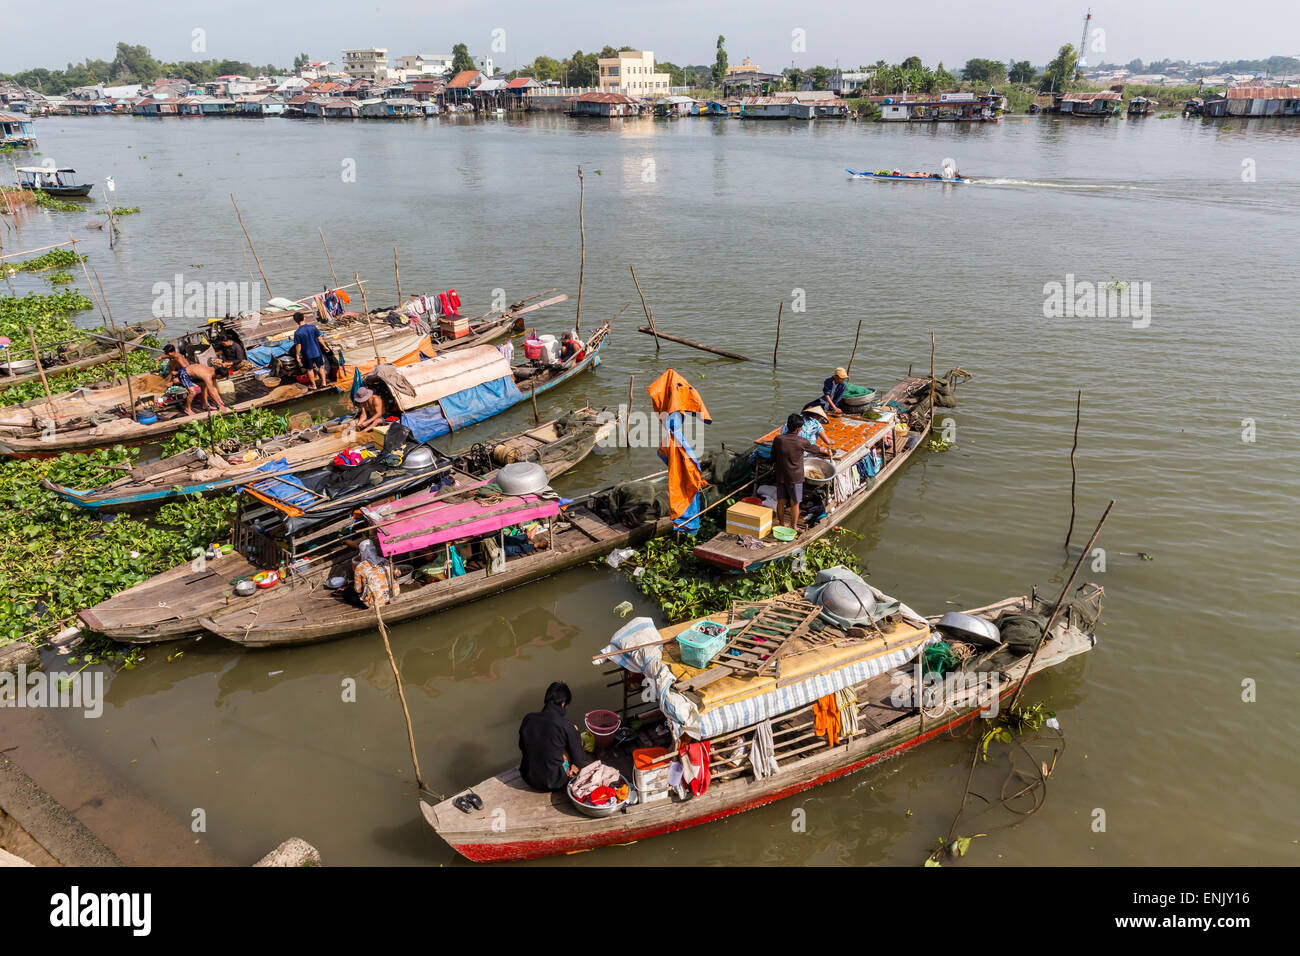 Families in their river boats at the local market in Chau Doc, Mekong River Delta, Vietnam, Indochina, Southeast Asia, Asia Stock Photo